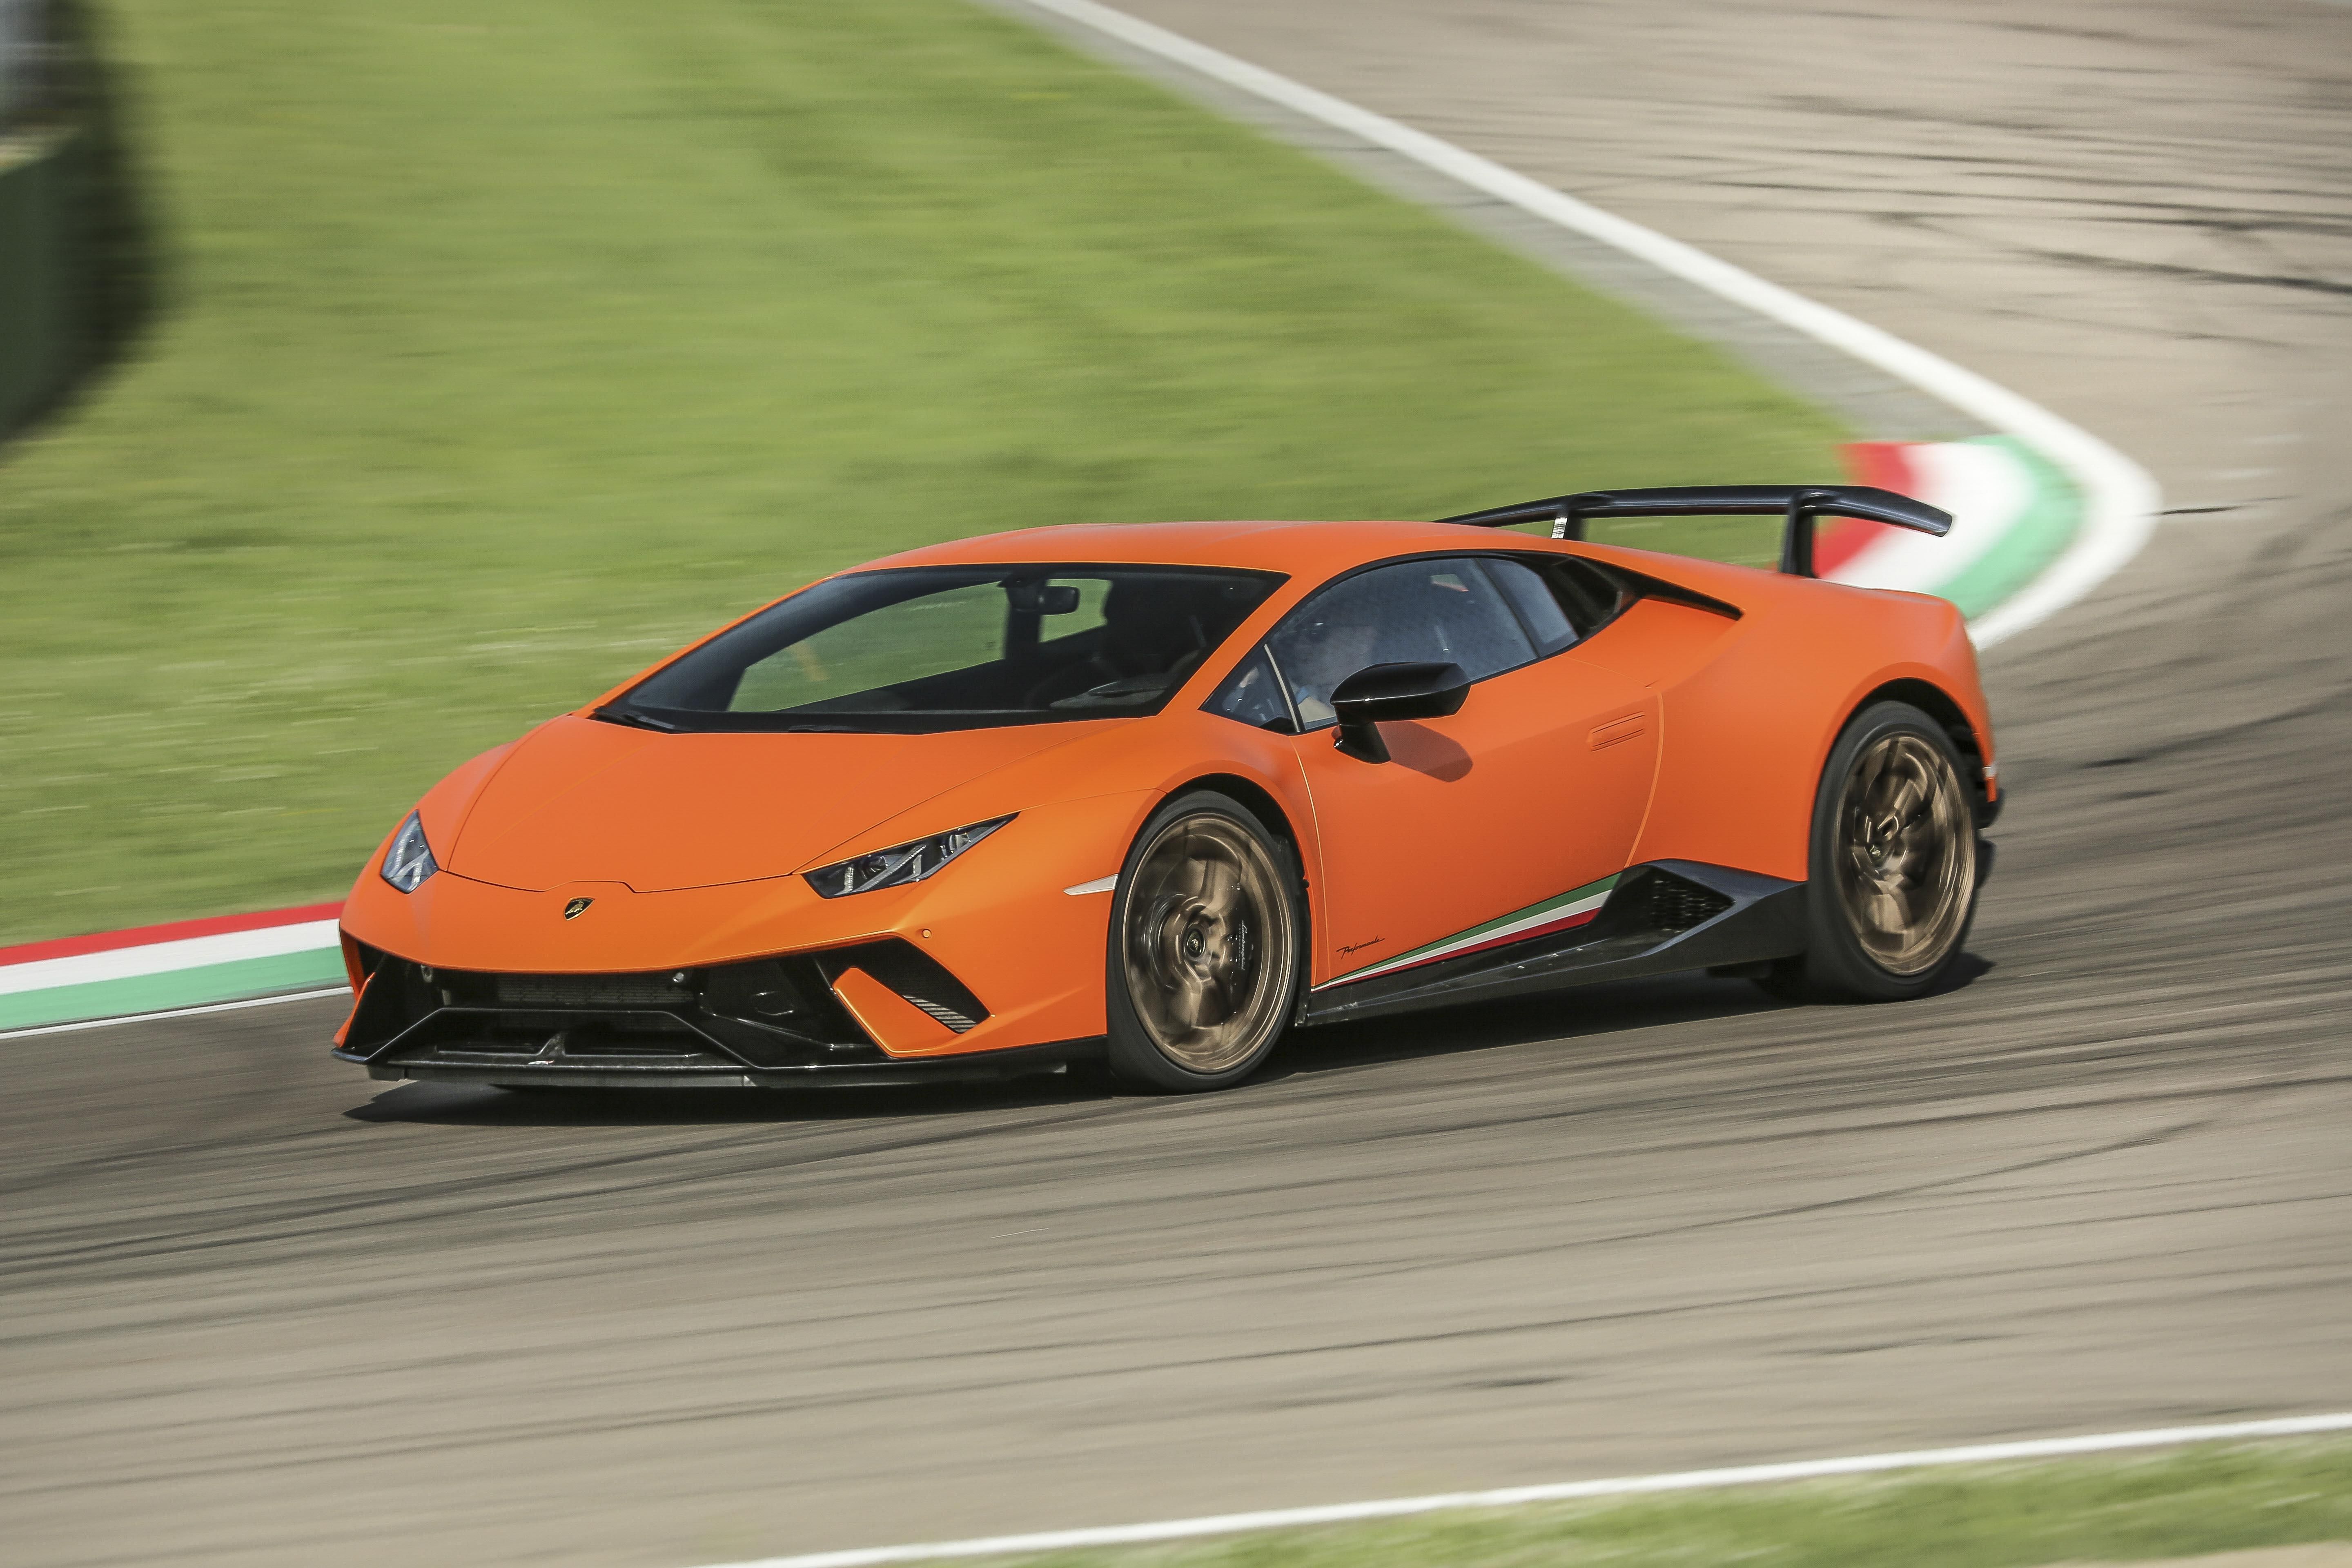 A Huracan Performante on a track.